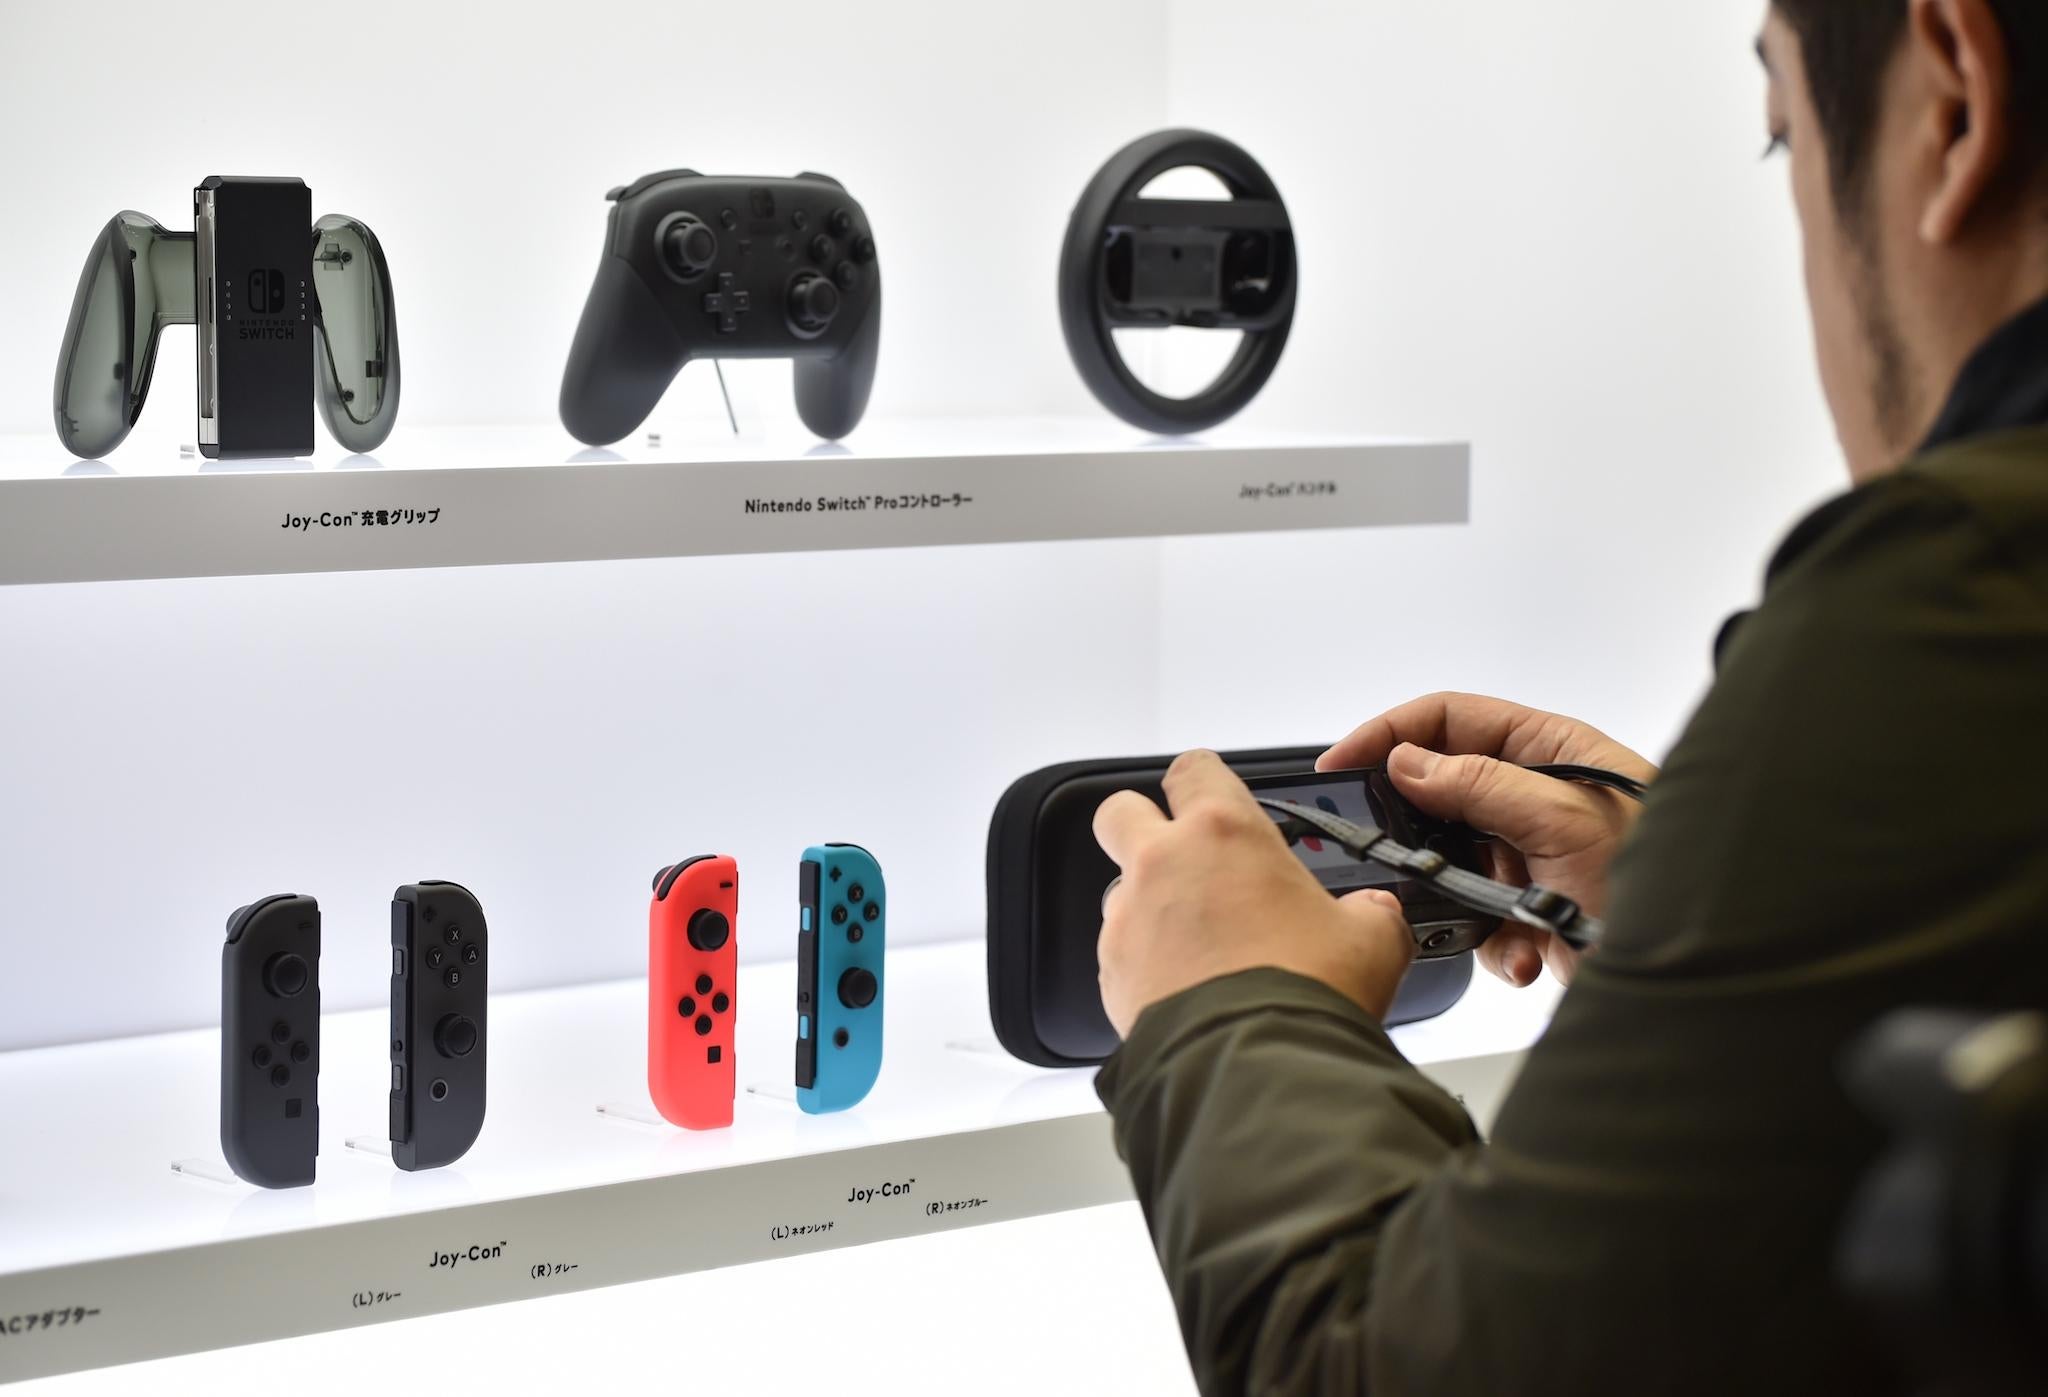 Nintendo's new video game console Switch is displayed at a presentation in Tokyo on January 13, 2017